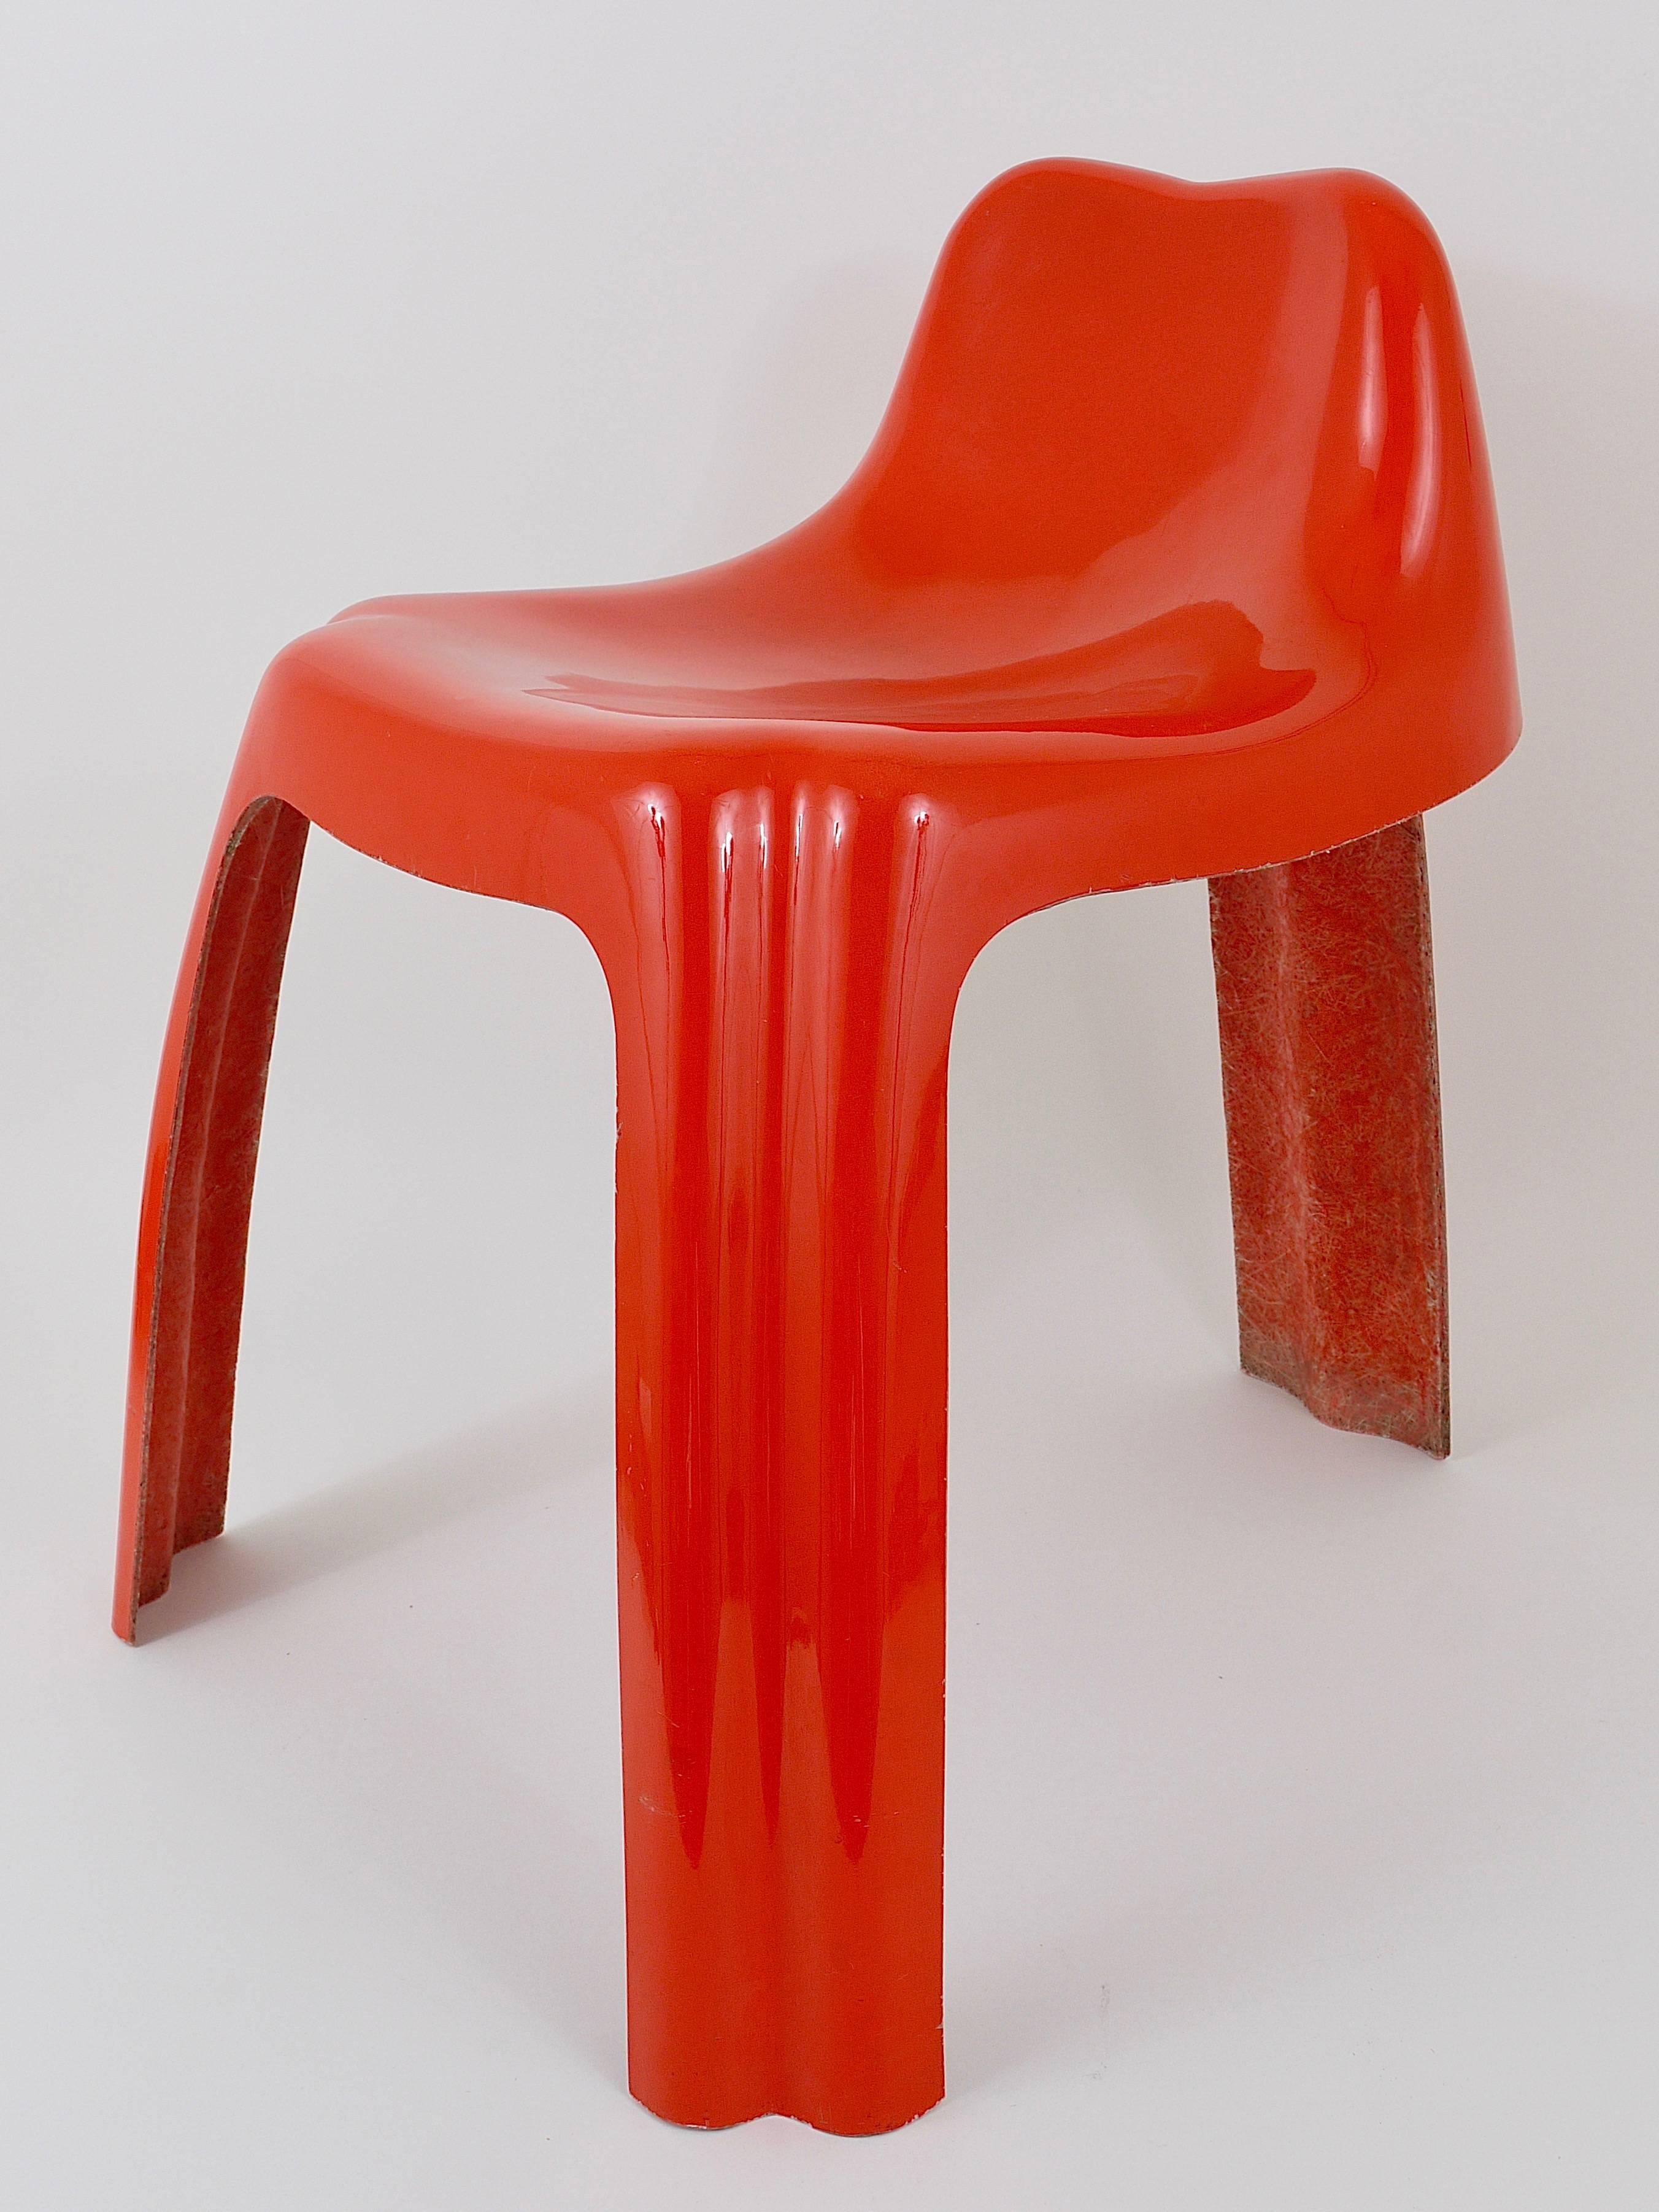 Lacquered Orange Fiberglass Chair Ginger by Patrick Gingembre, Paulus, France, 1970s For Sale